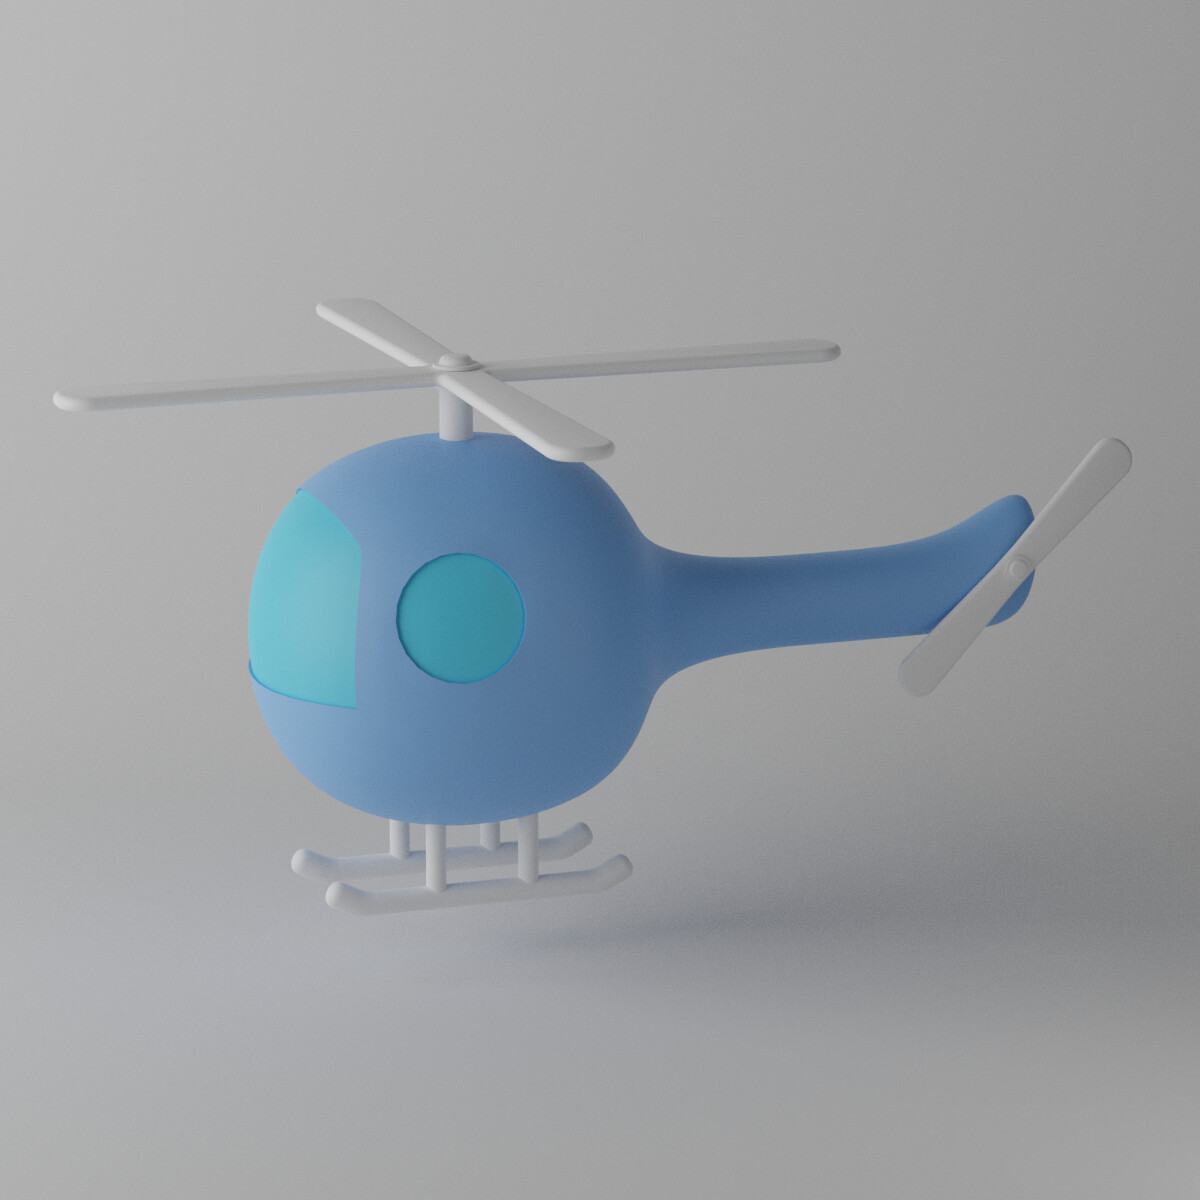 ArtStation - Cartoon Cute Helicopter 3D Model | Resources